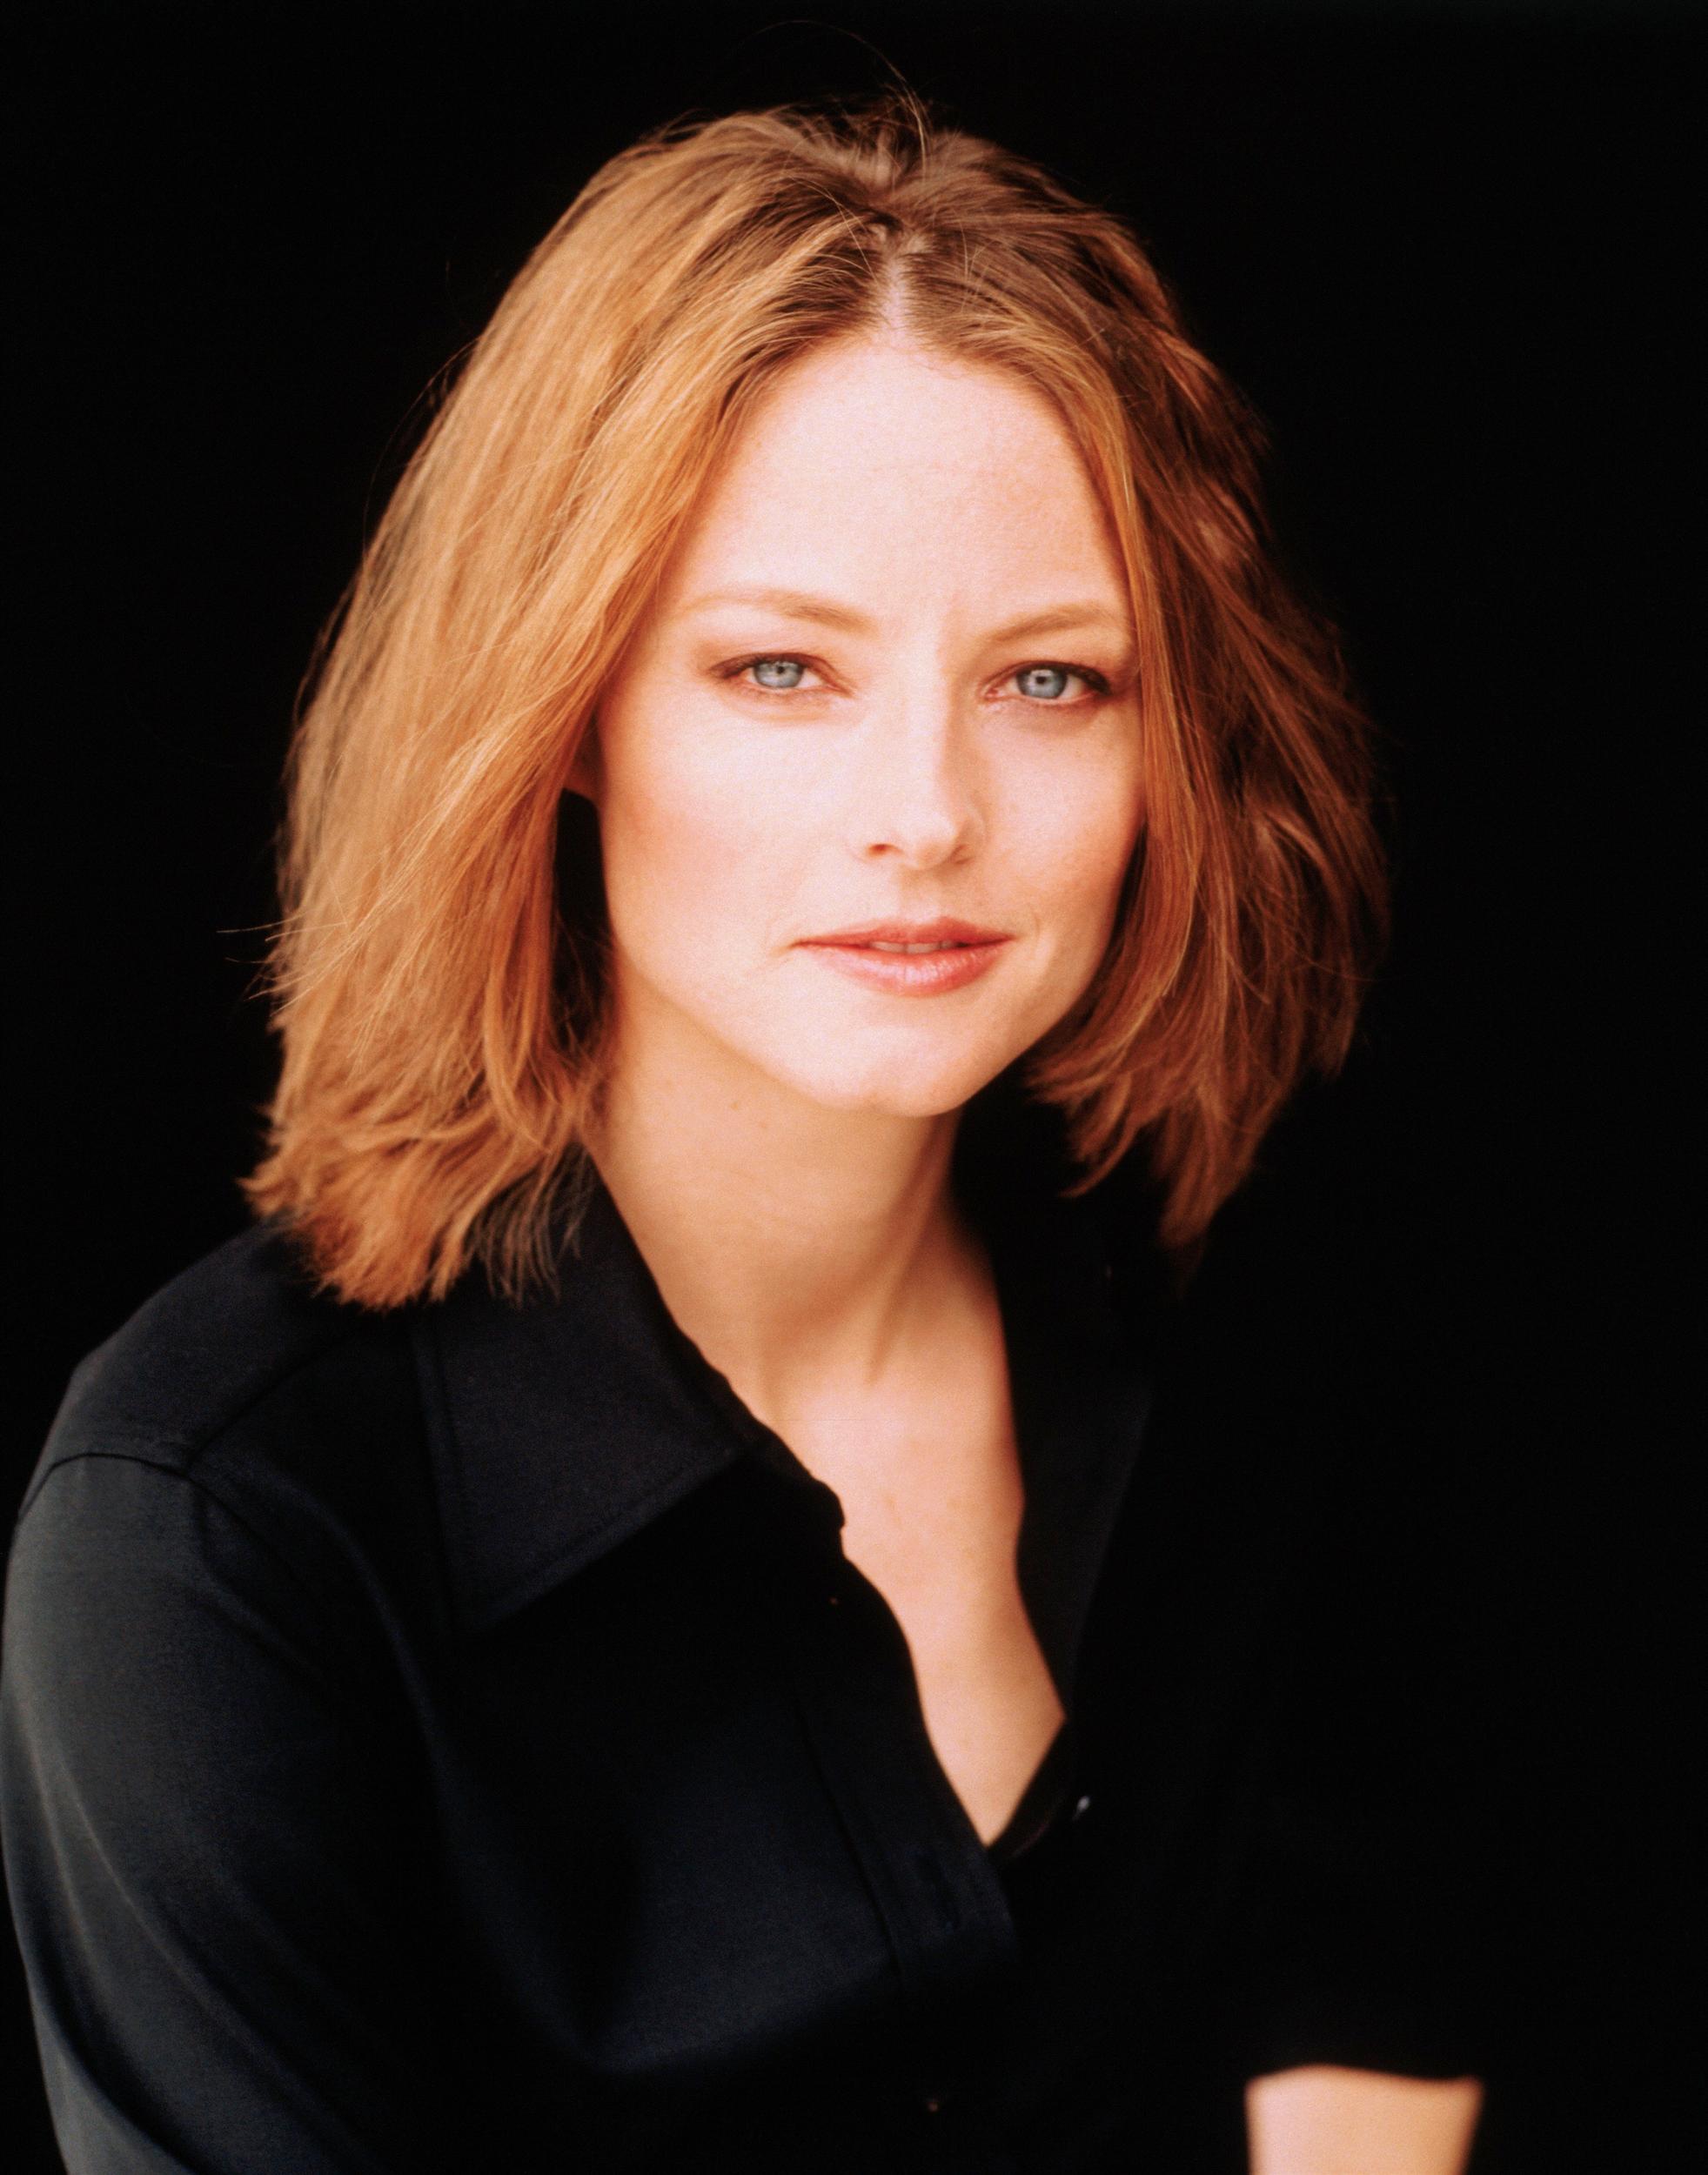 jodie-foster-young